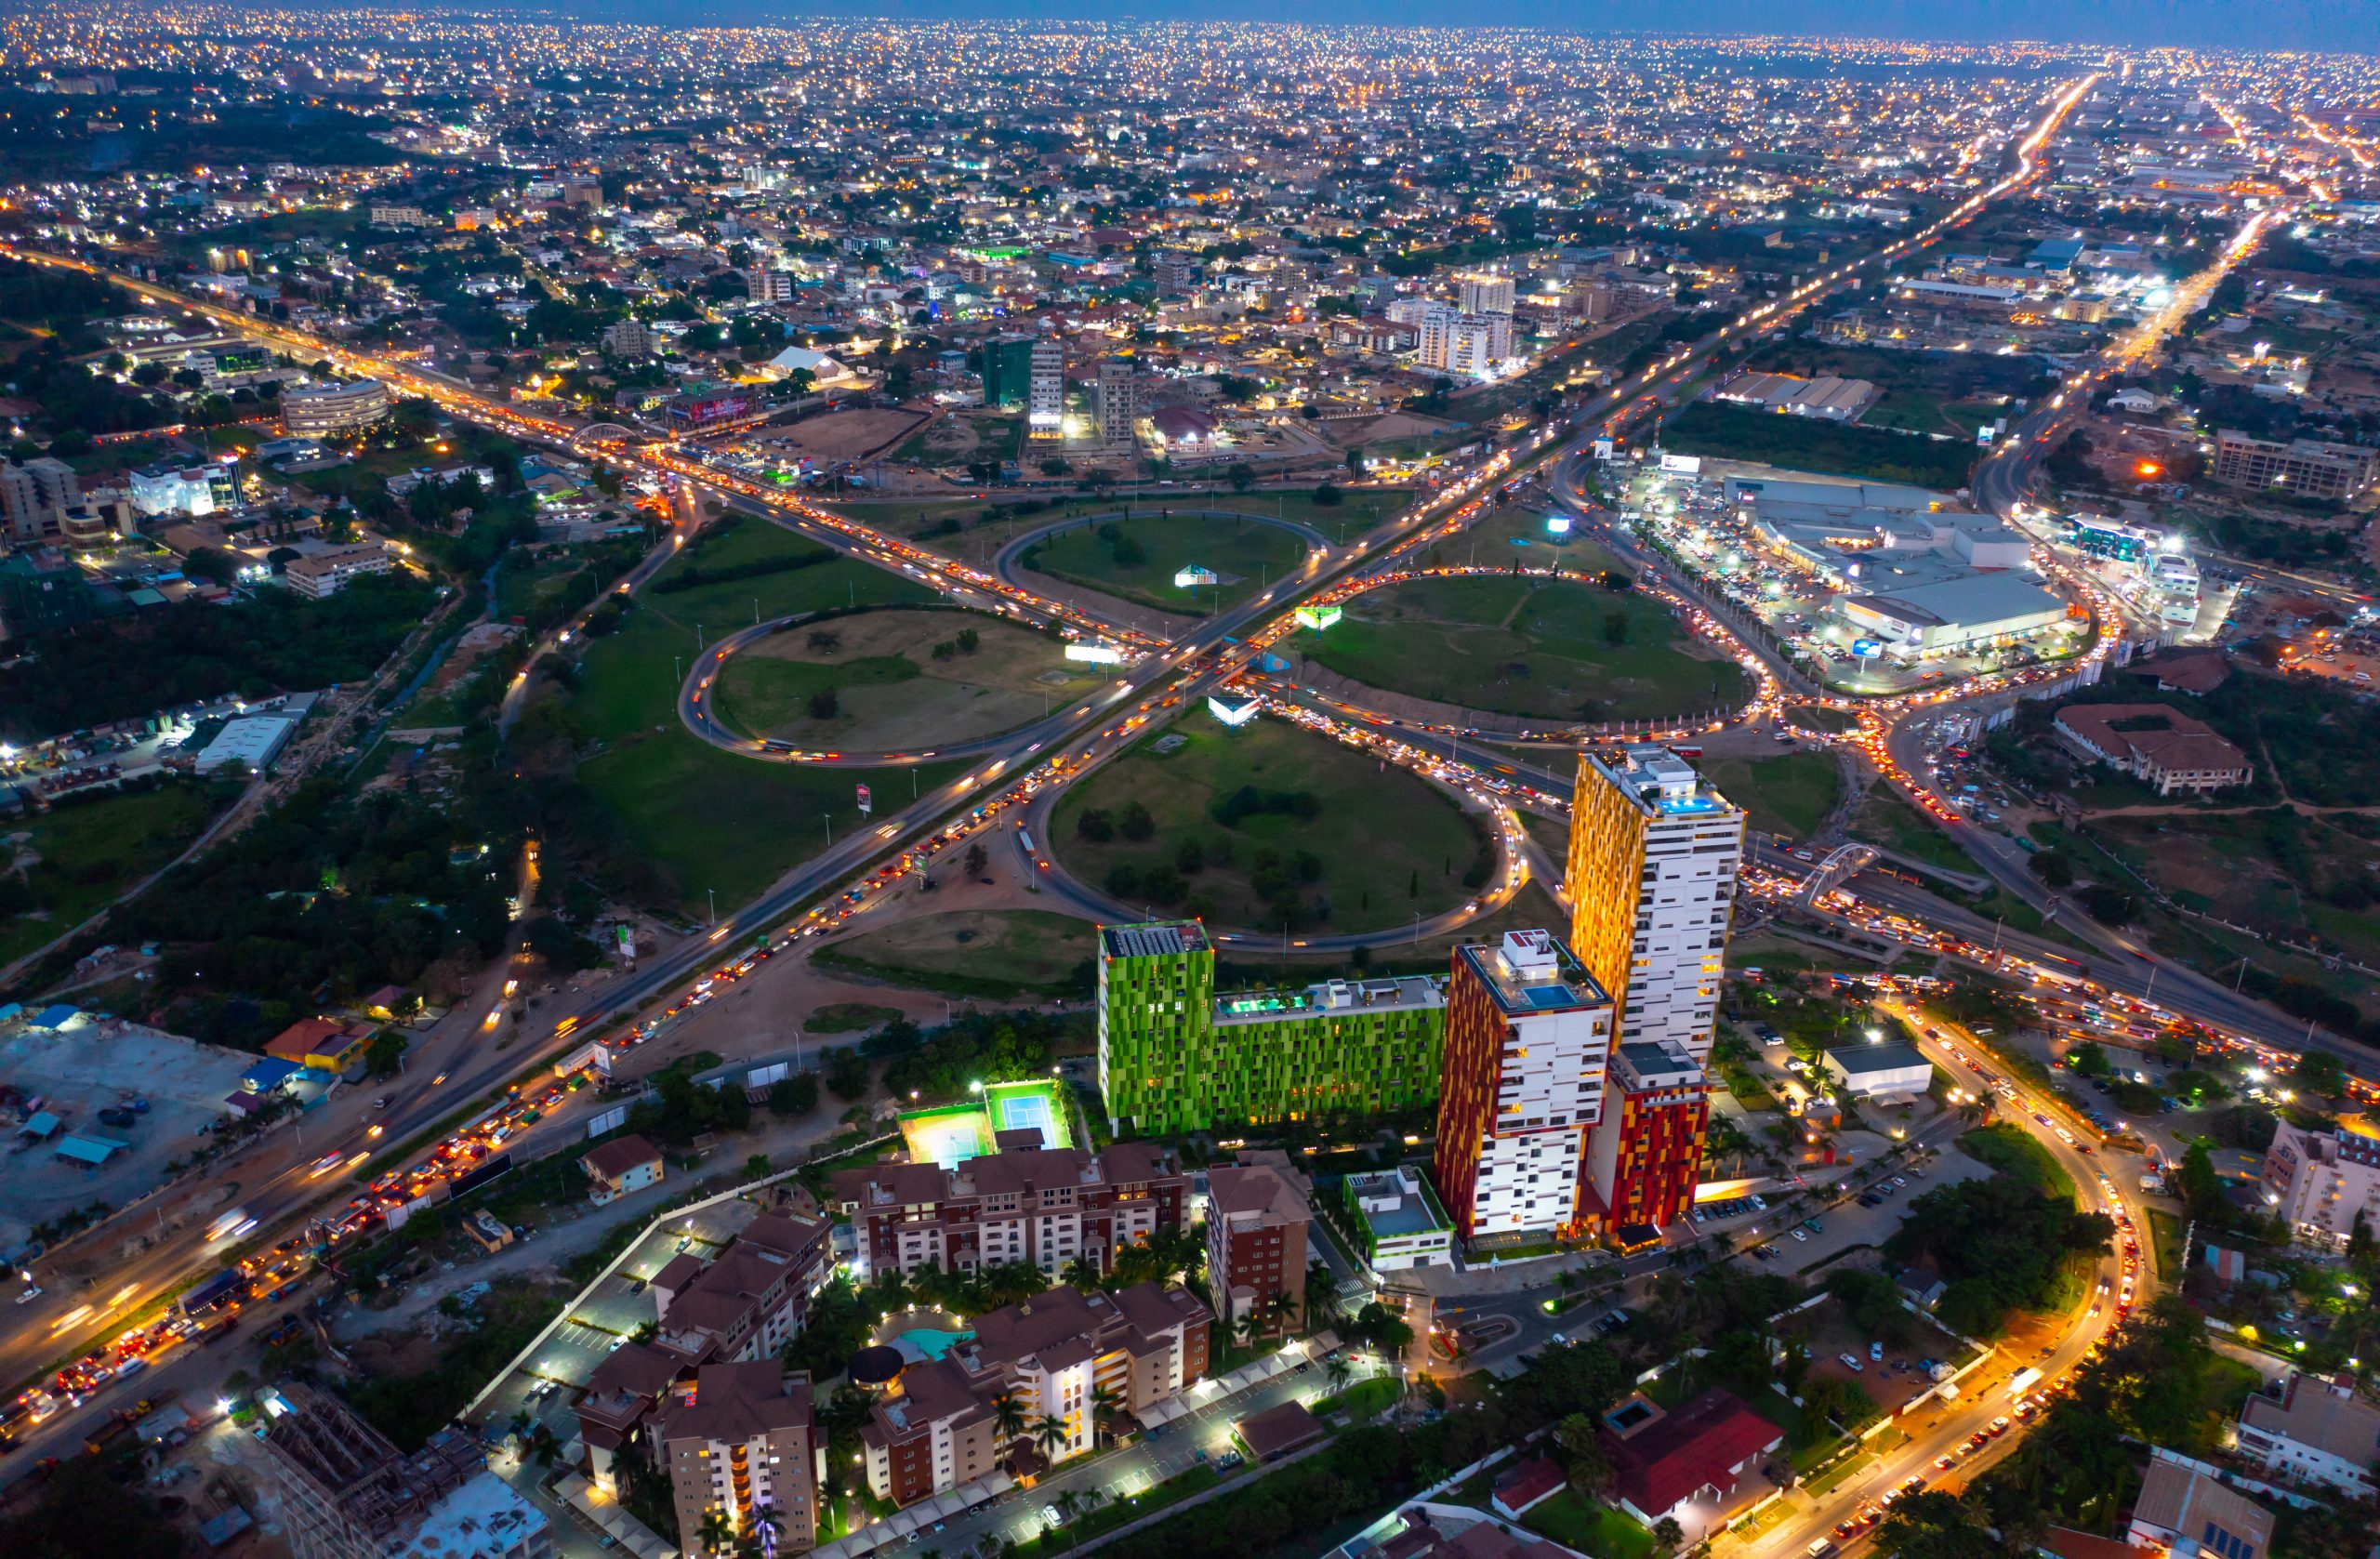 Thelo DB Project: Aerial shot of the city of Accra in Ghana at night